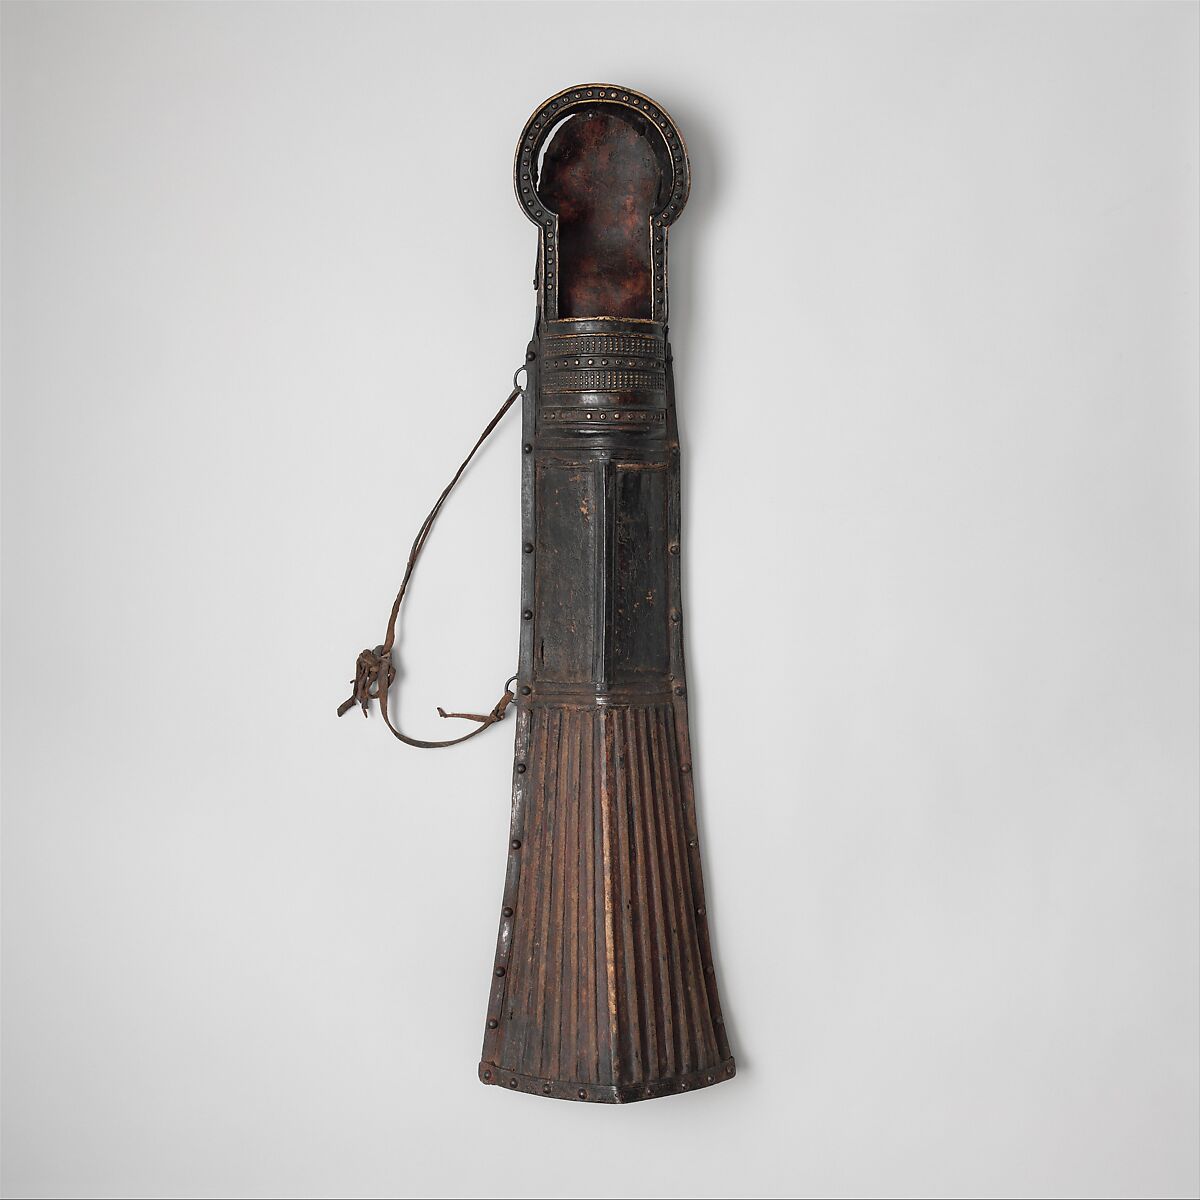 Quiver (mda' shubs) with Accessory, Leather, iron, copper alloy, wicker (bamboo or cane), wood, Tibetan or Mongolian 